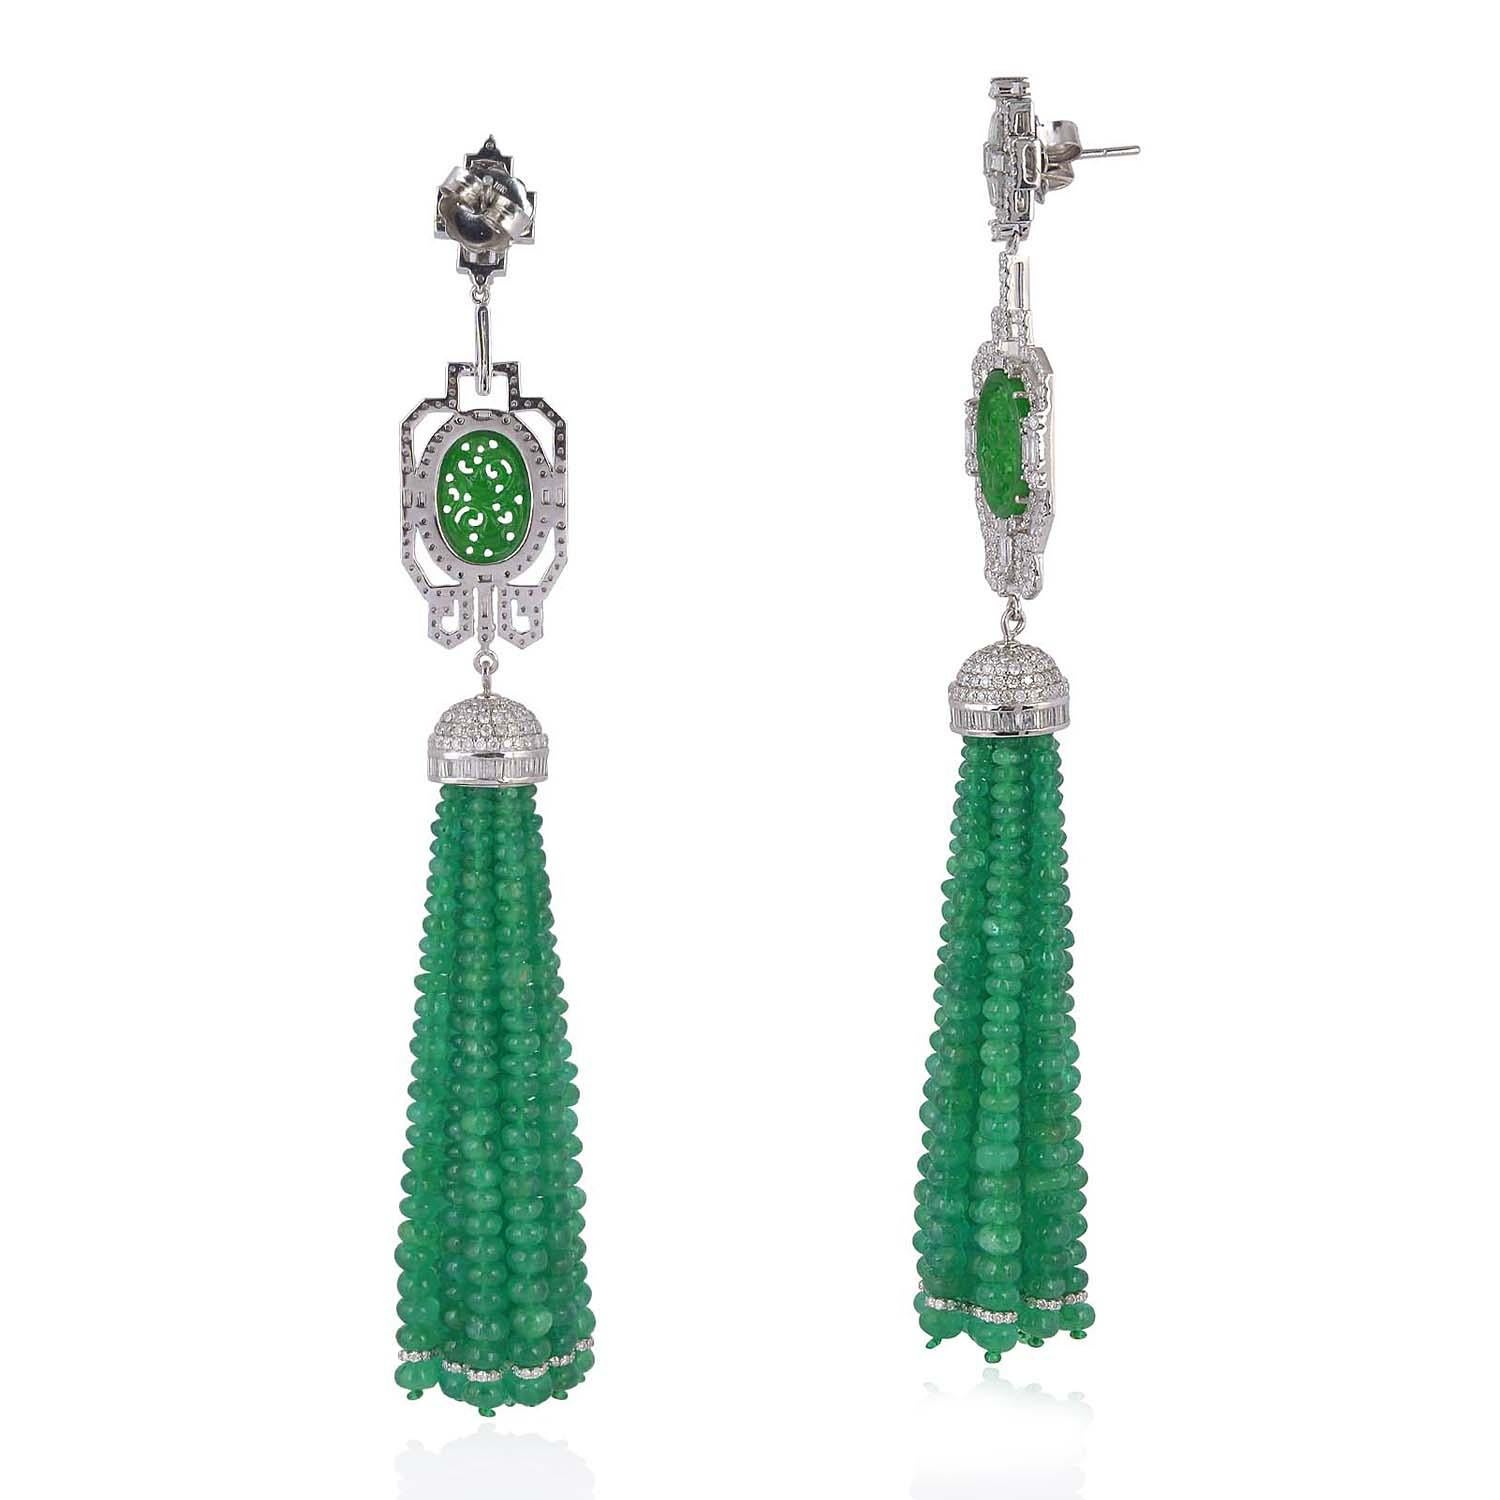 These stunning exceptional tassel earrings is handmade in 18-karat gold.  It is set with 128.1 carats emerald, 4.5 carats Jade and 6.32 carats of glittering diamonds.

FOLLOW  MEGHNA JEWELS storefront to view the latest collection & exclusive